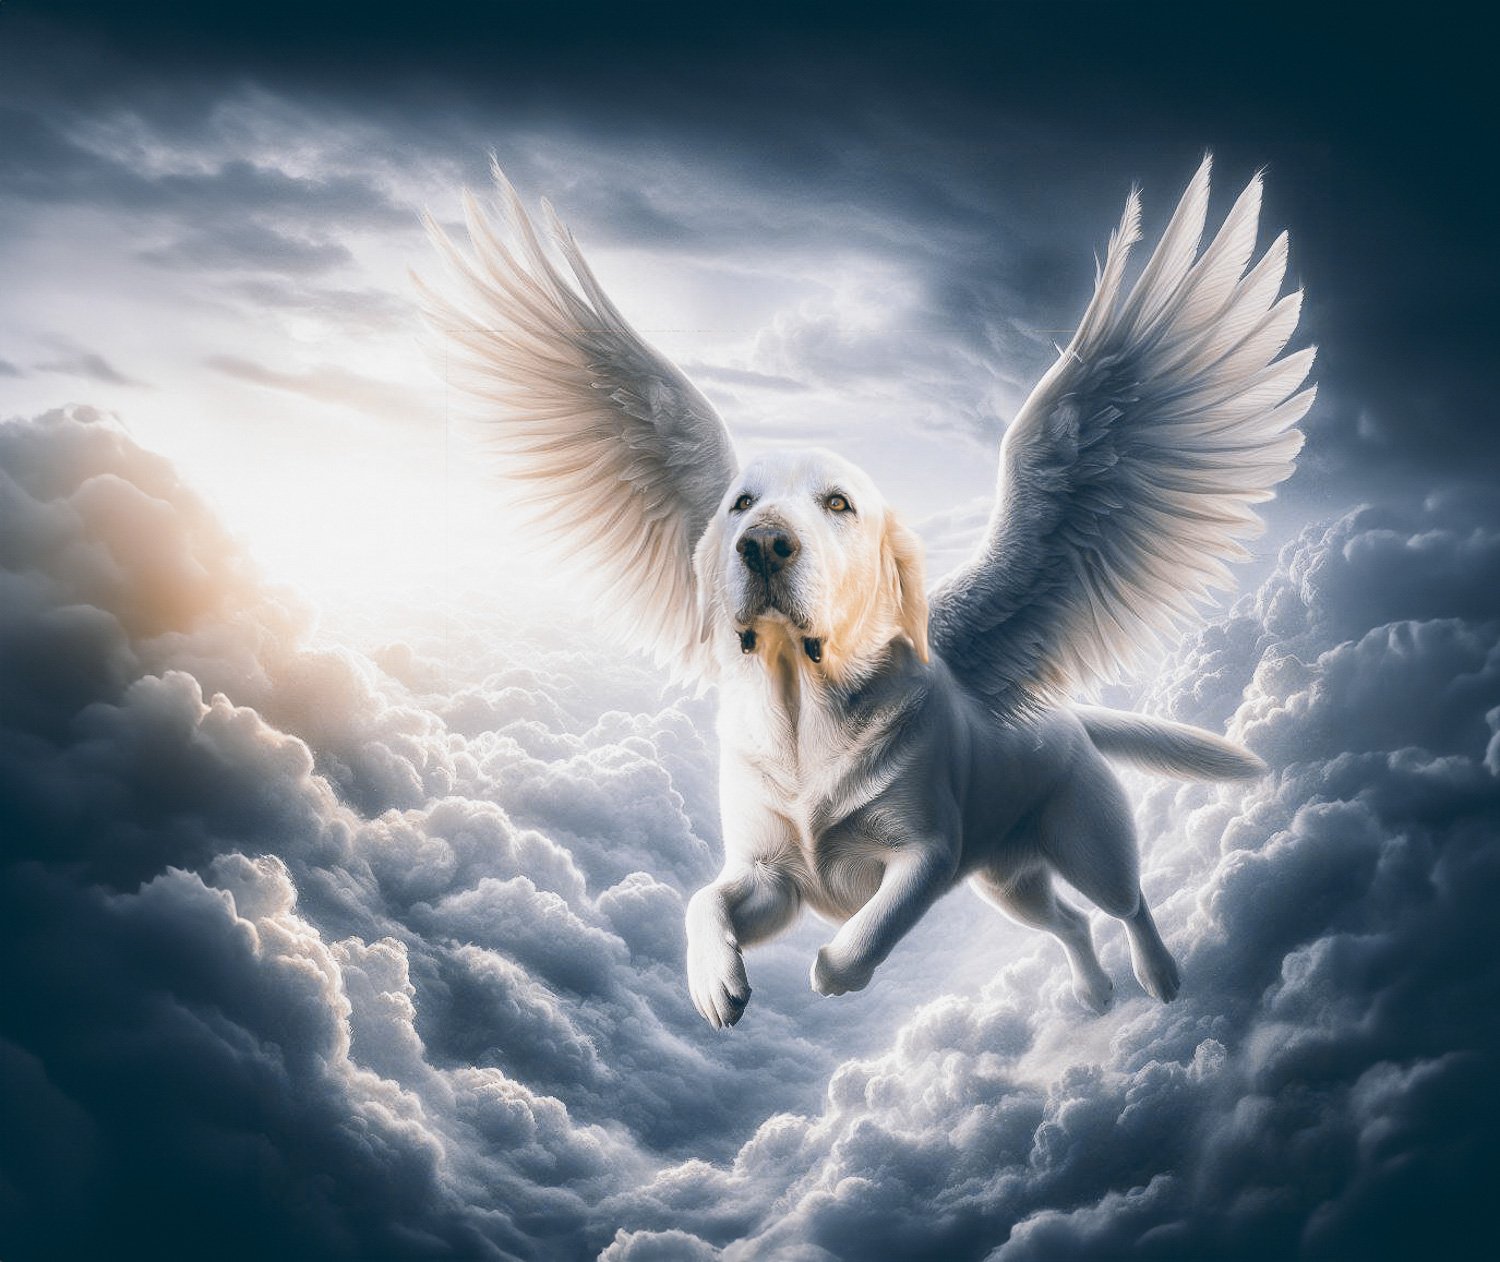 A white Golden Retriever dog with wings flying high above the clouds